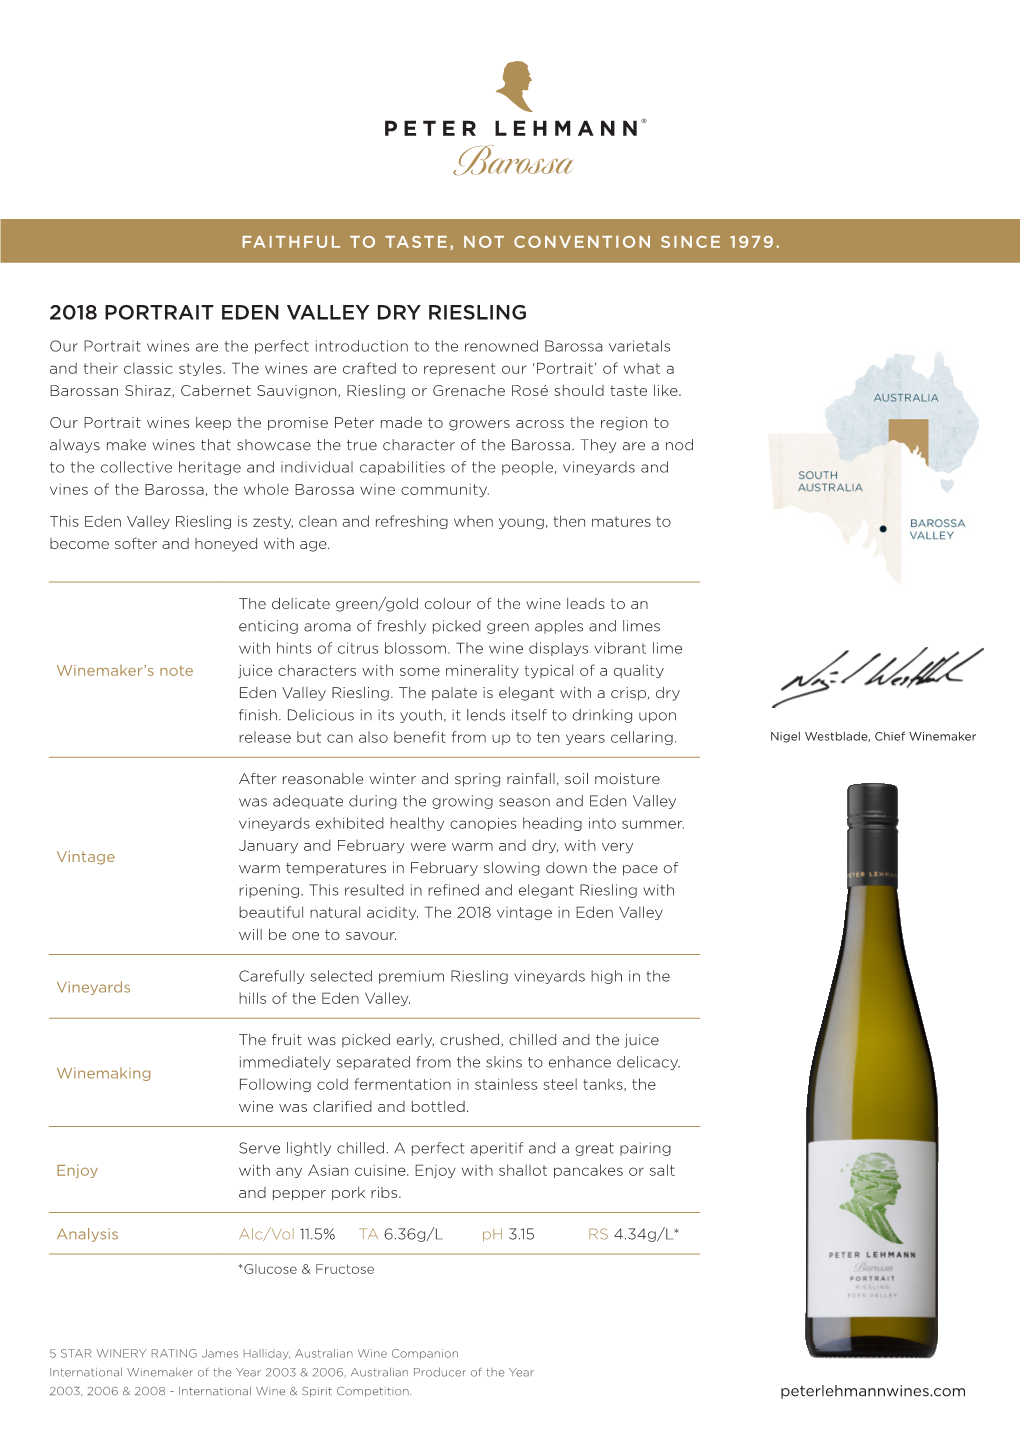 2018 PORTRAIT EDEN VALLEY DRY RIESLING Our Portrait Wines Are the Perfect Introduction to the Renowned Barossa Varietals and Their Classic Styles